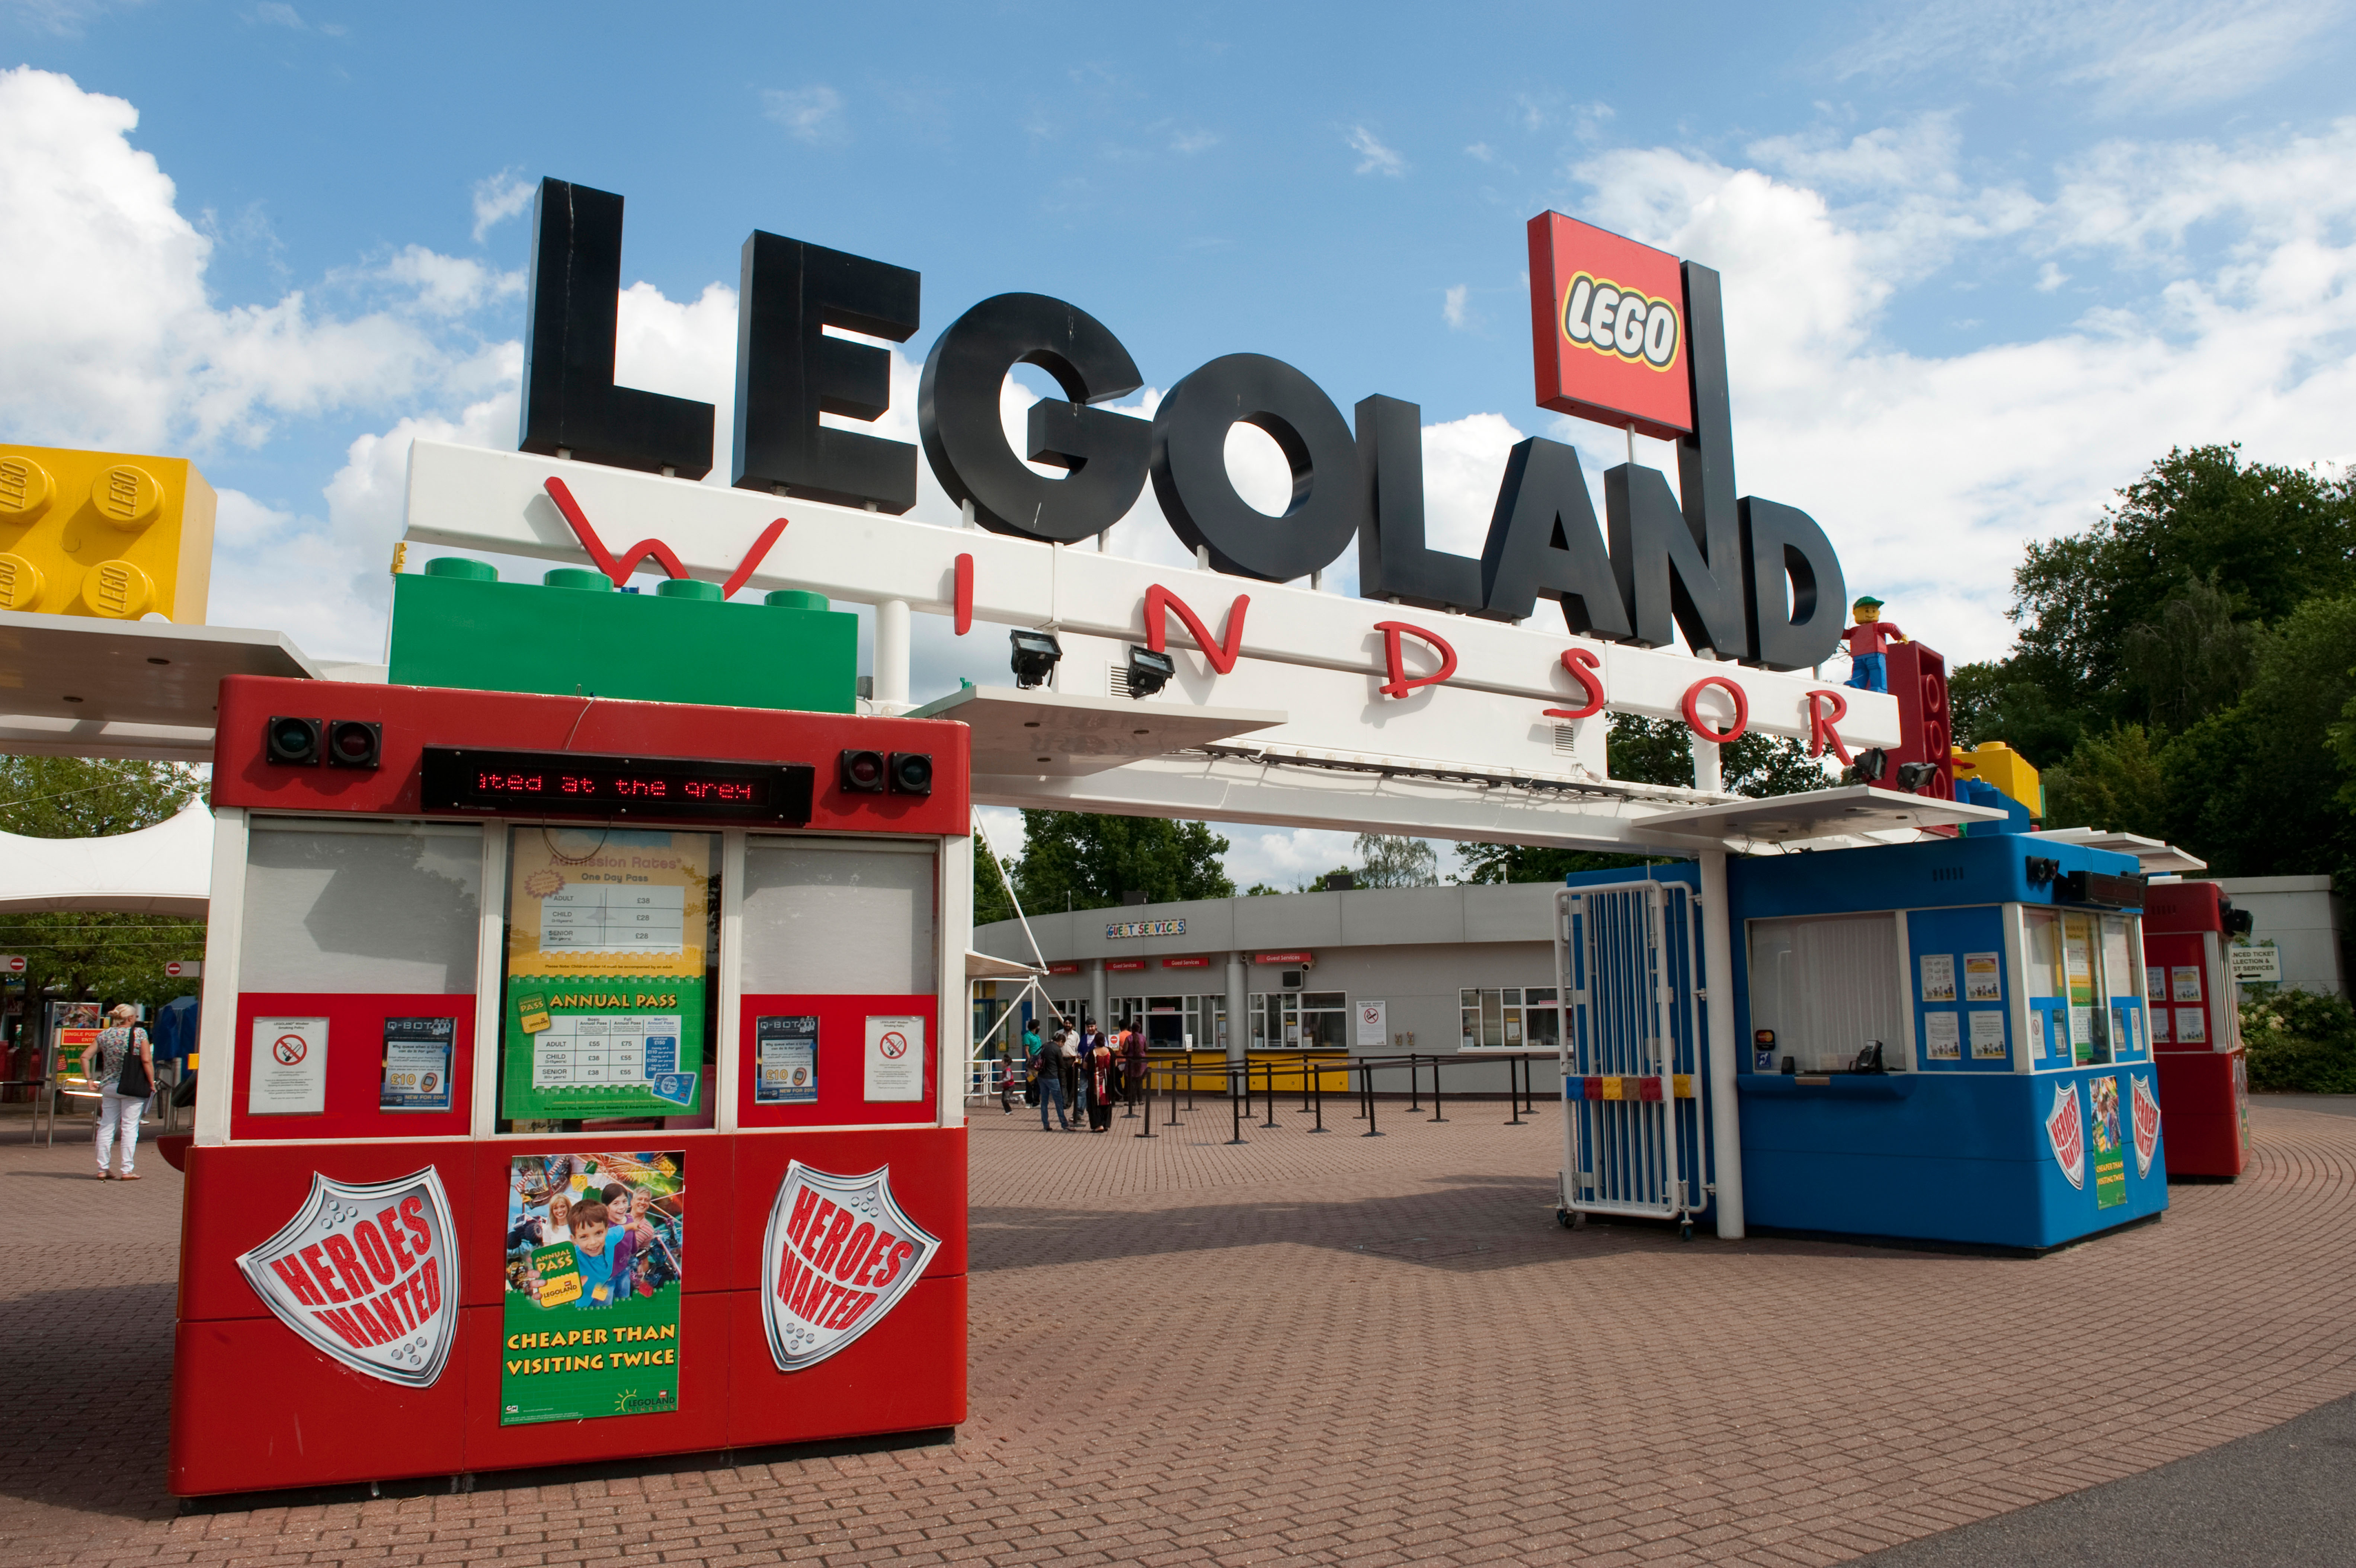 Baby boy dies after suffering cardiac arrest at Legoland Windsor as woman held